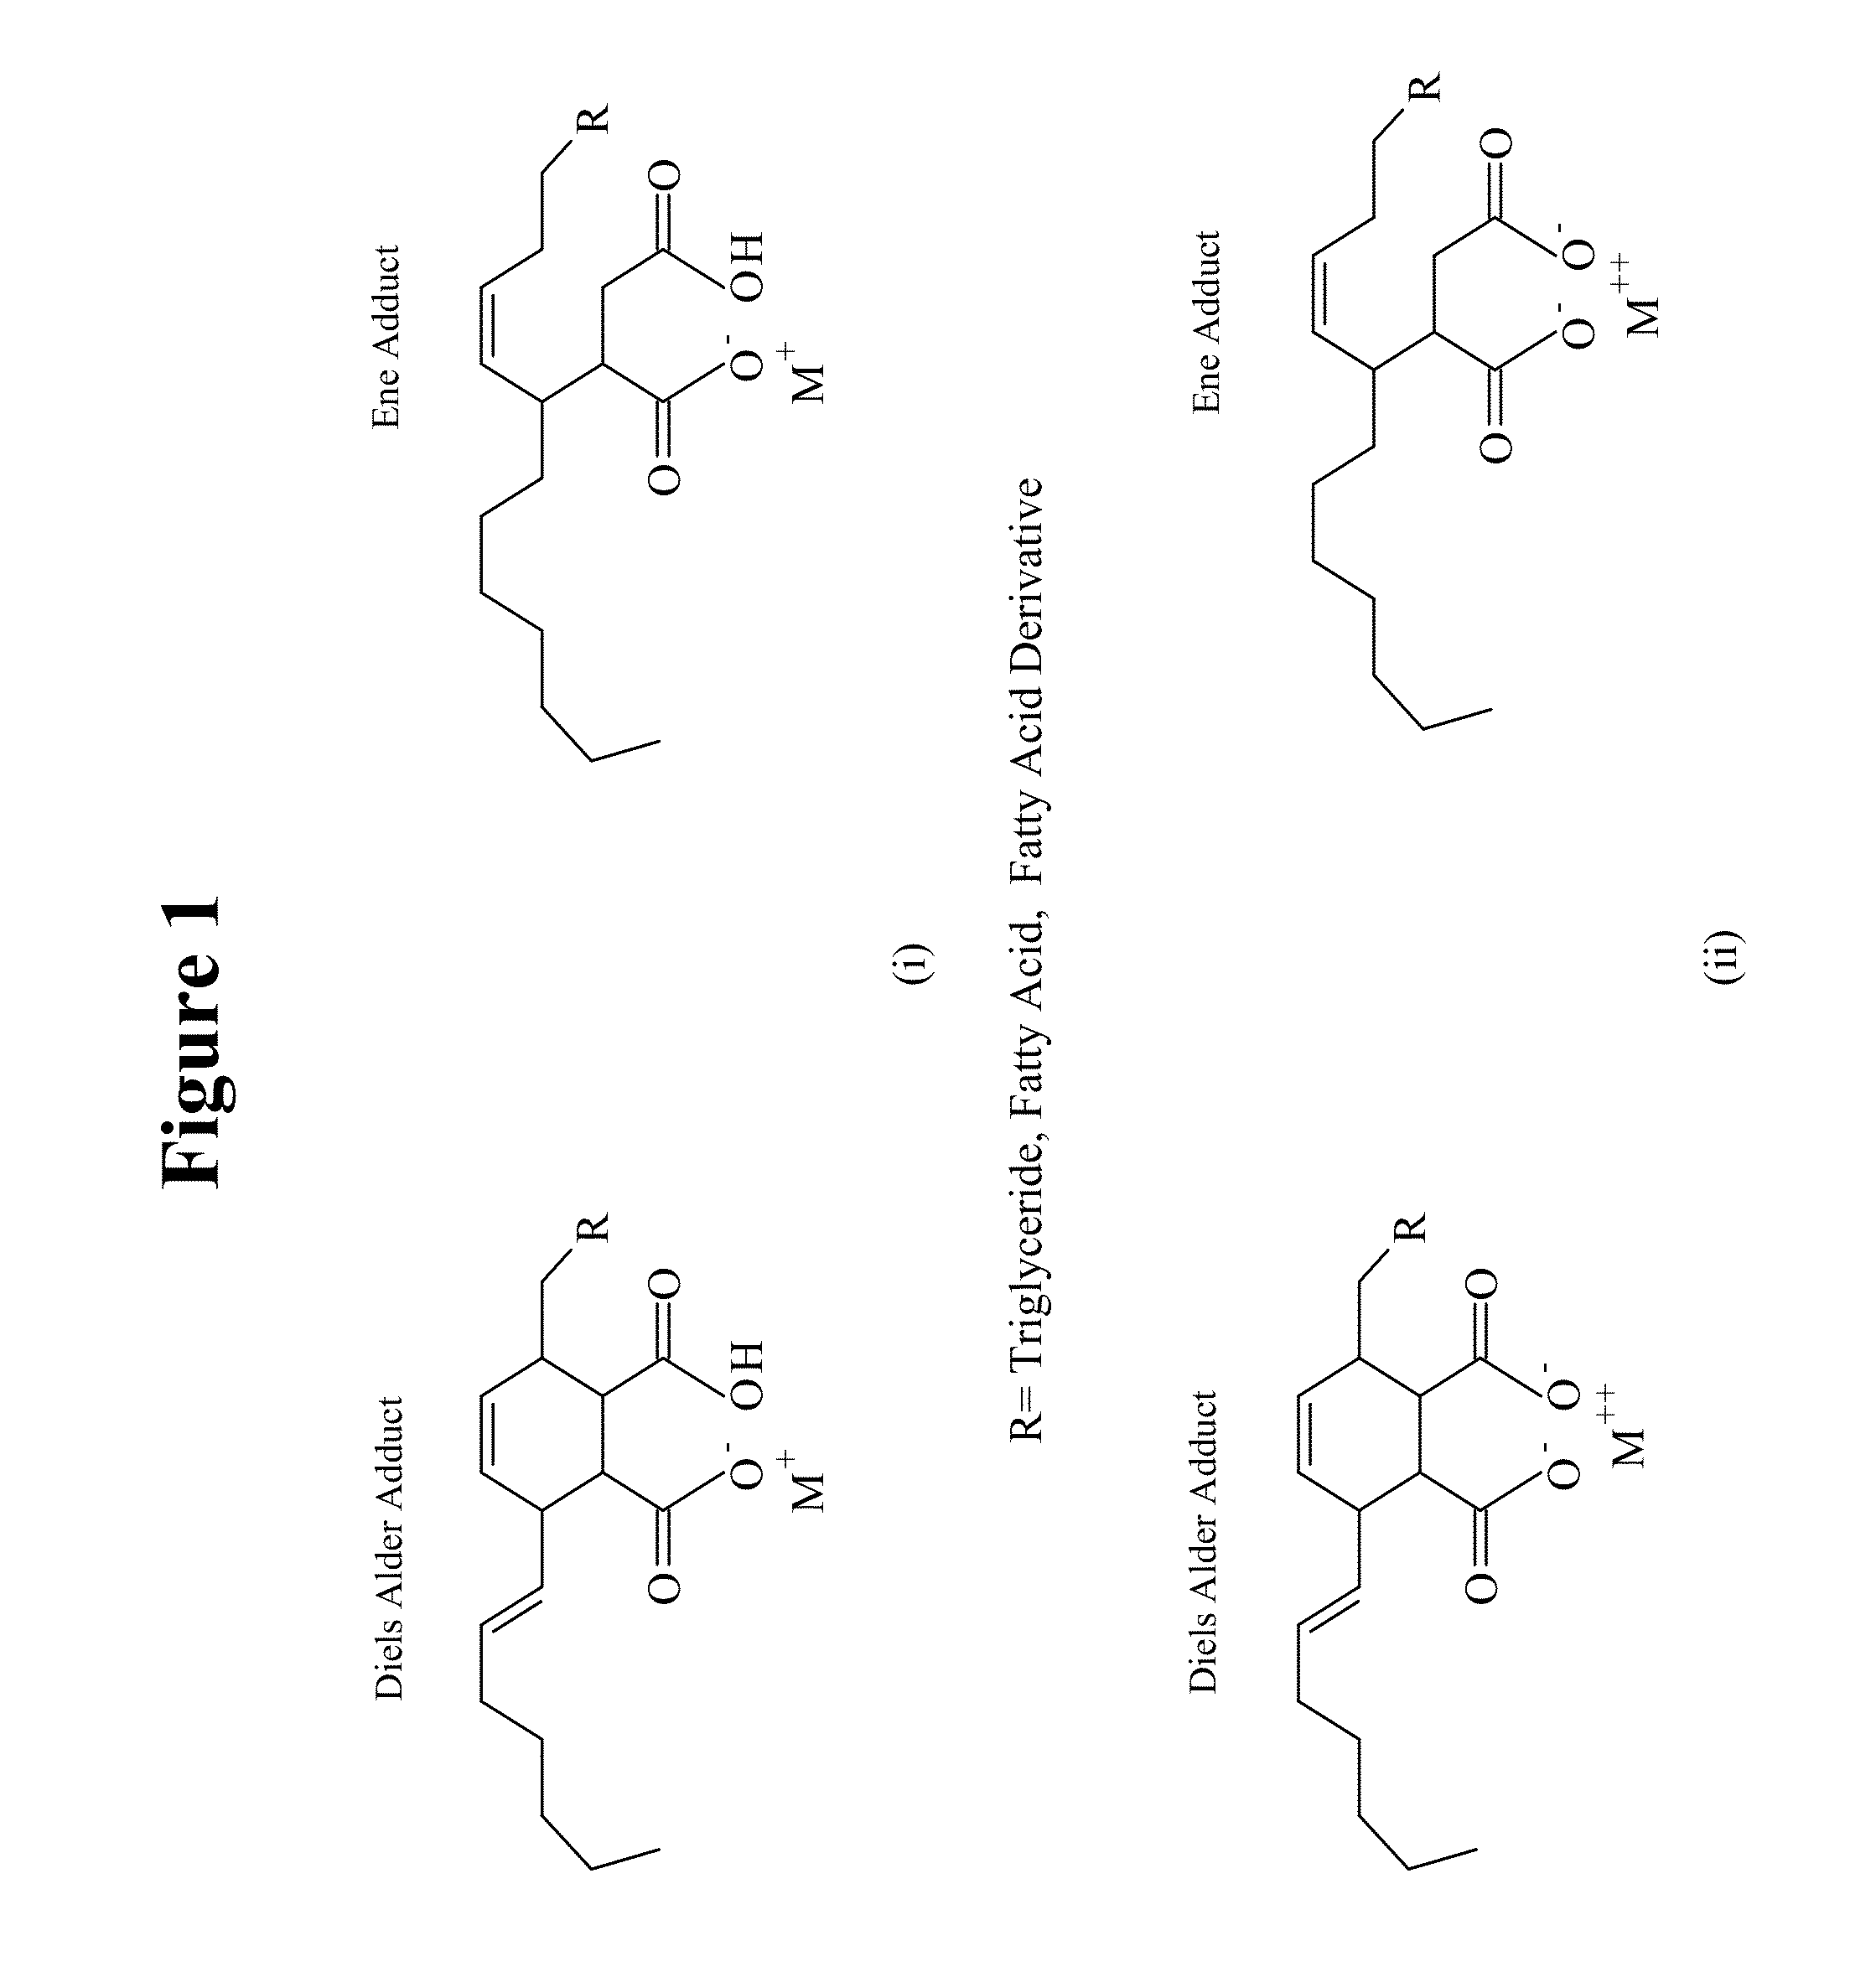 Natural oil based gels, applications and methods of preparation